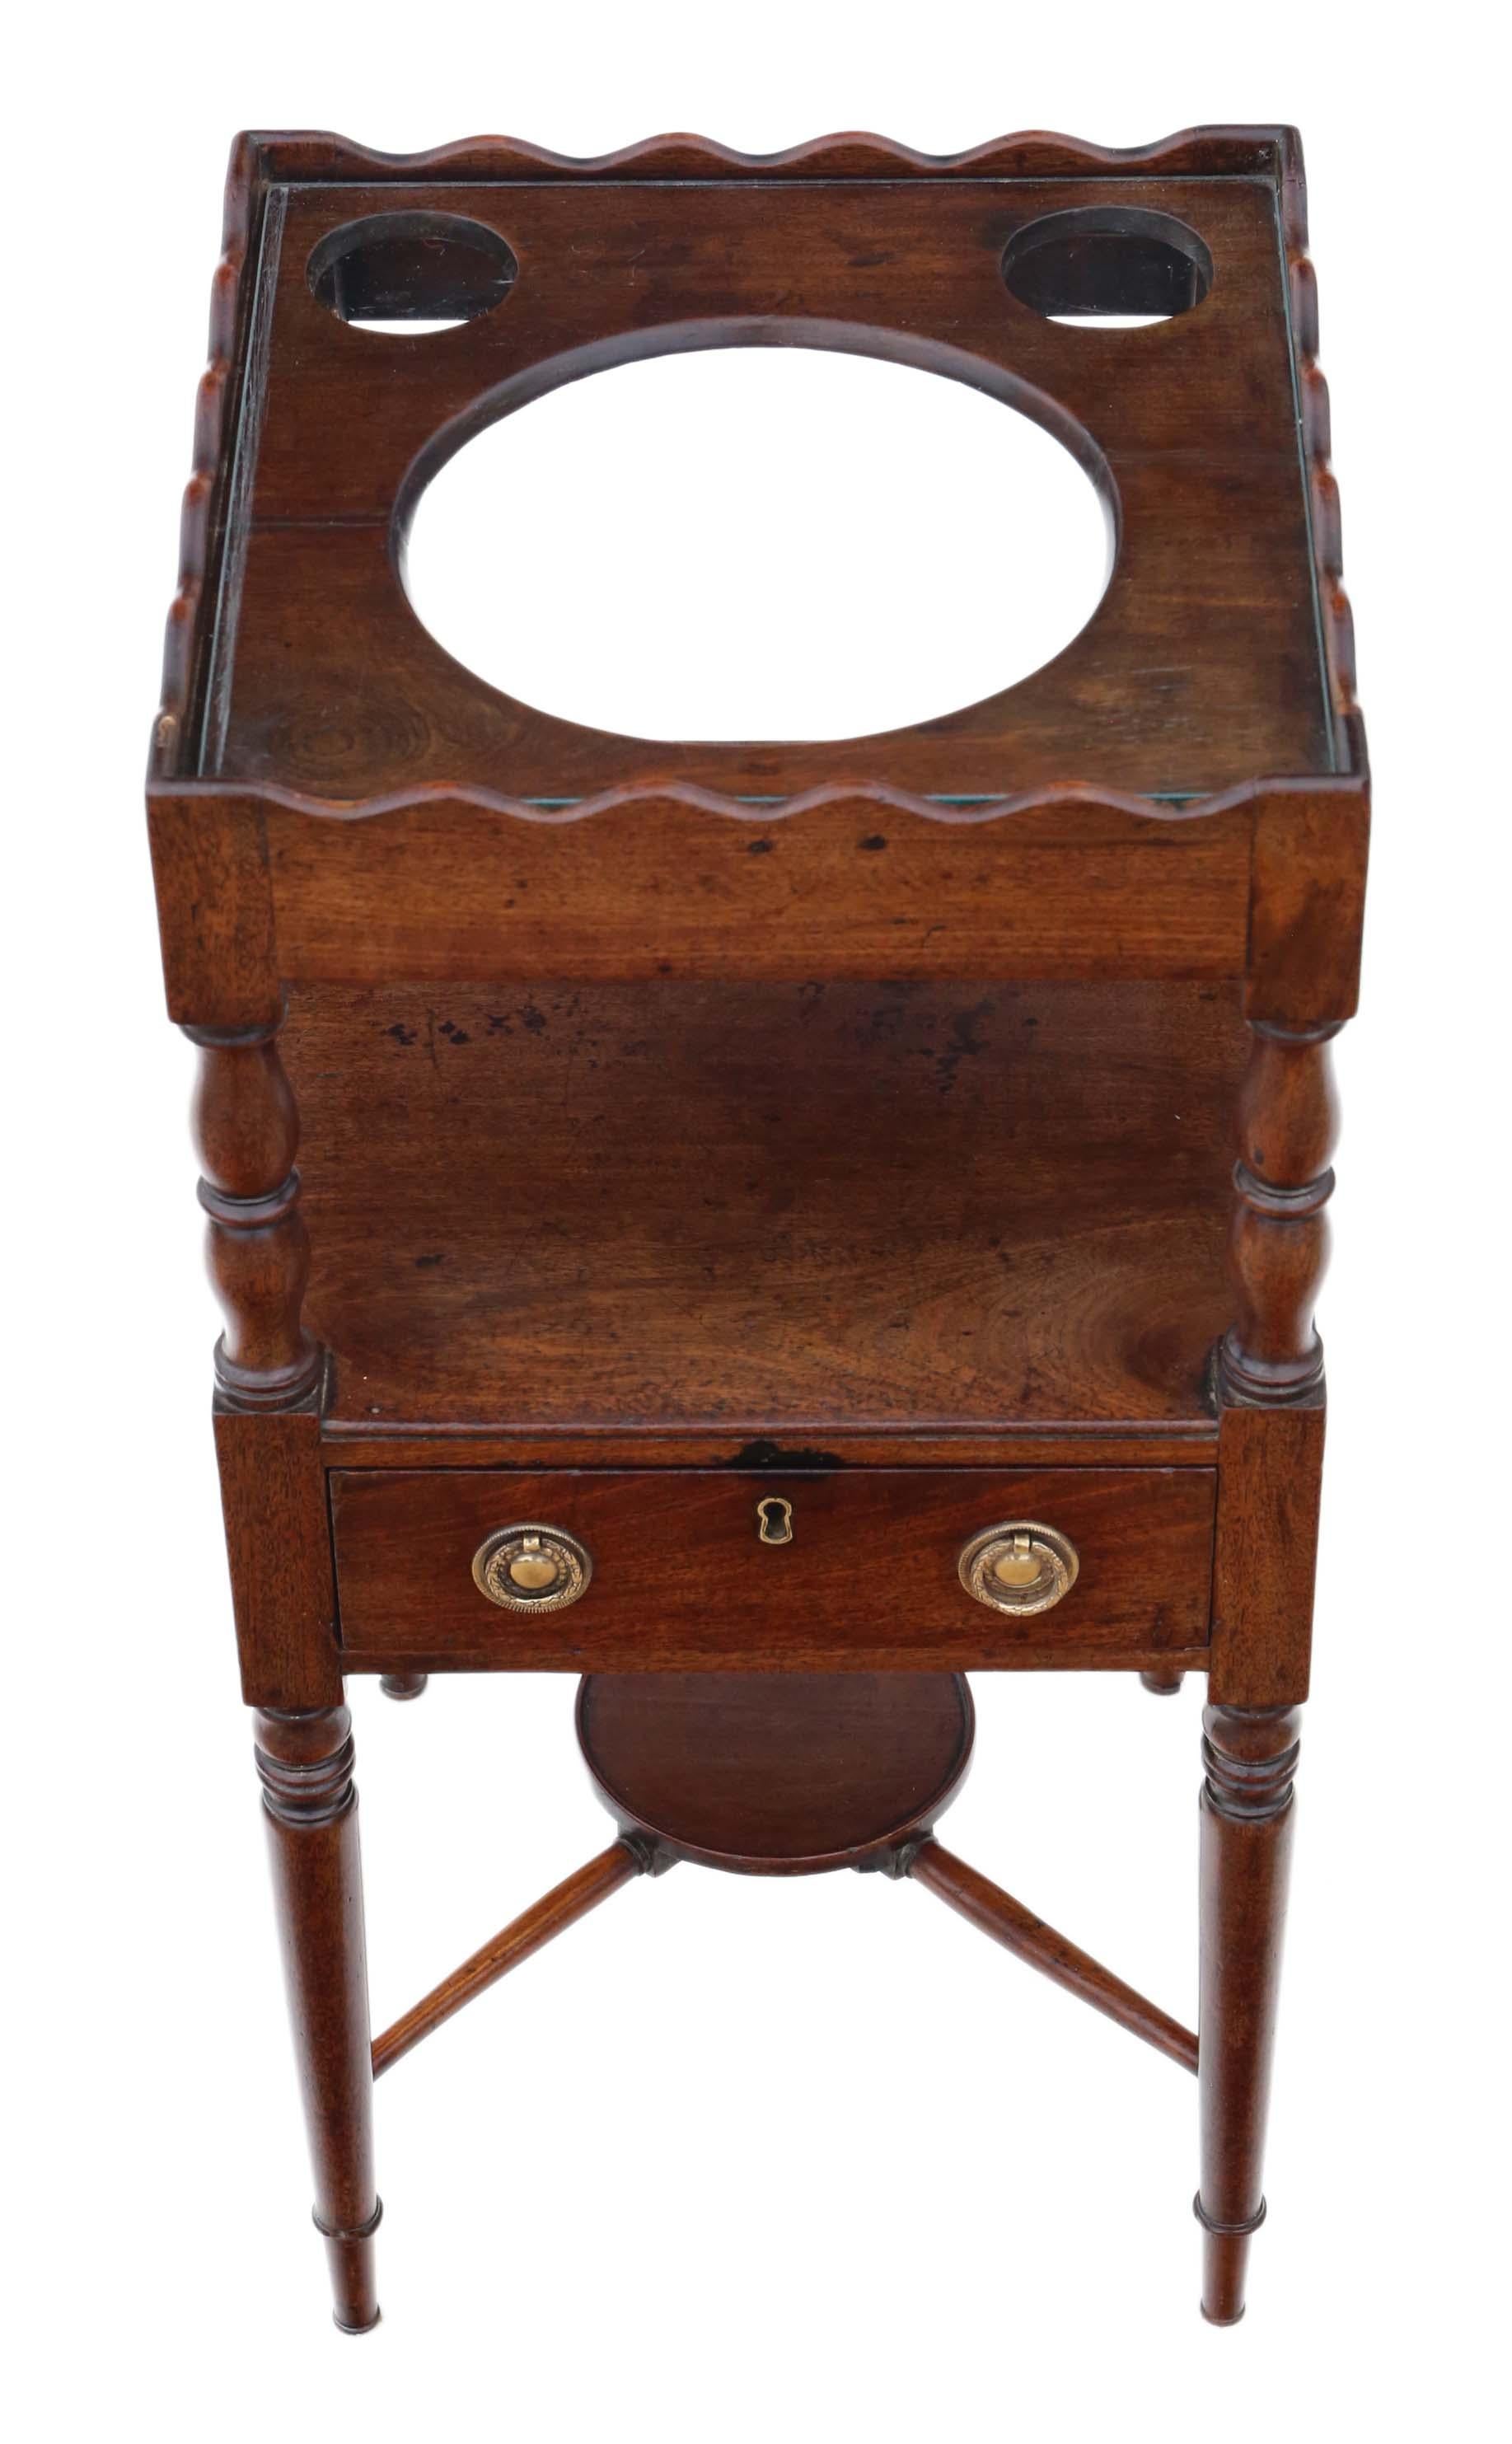 Antique quality Georgian circa 1820 inlaid mahogany washstand bedside table with a glass top.
Great rare item, which is solid with no loose joints and no woodworm. The oak lined drawer slides freely.
Lovely age, colour and patina.
Measures: 36cm